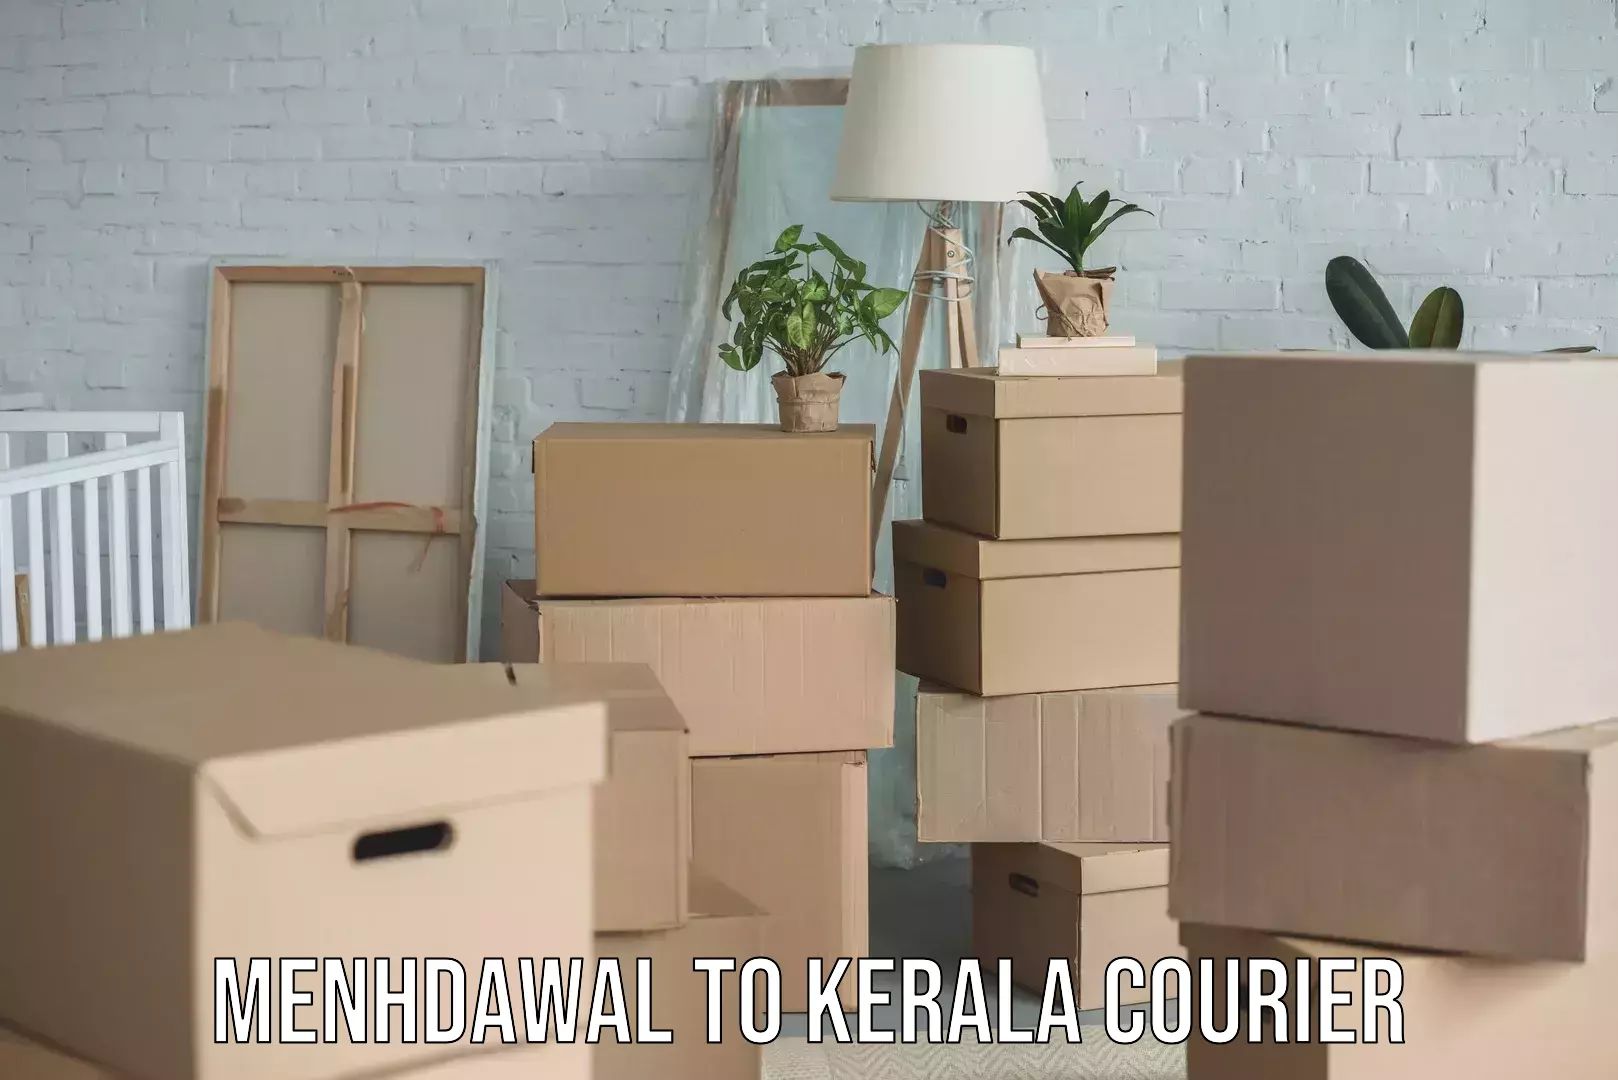 Affordable relocation services Menhdawal to Kerala